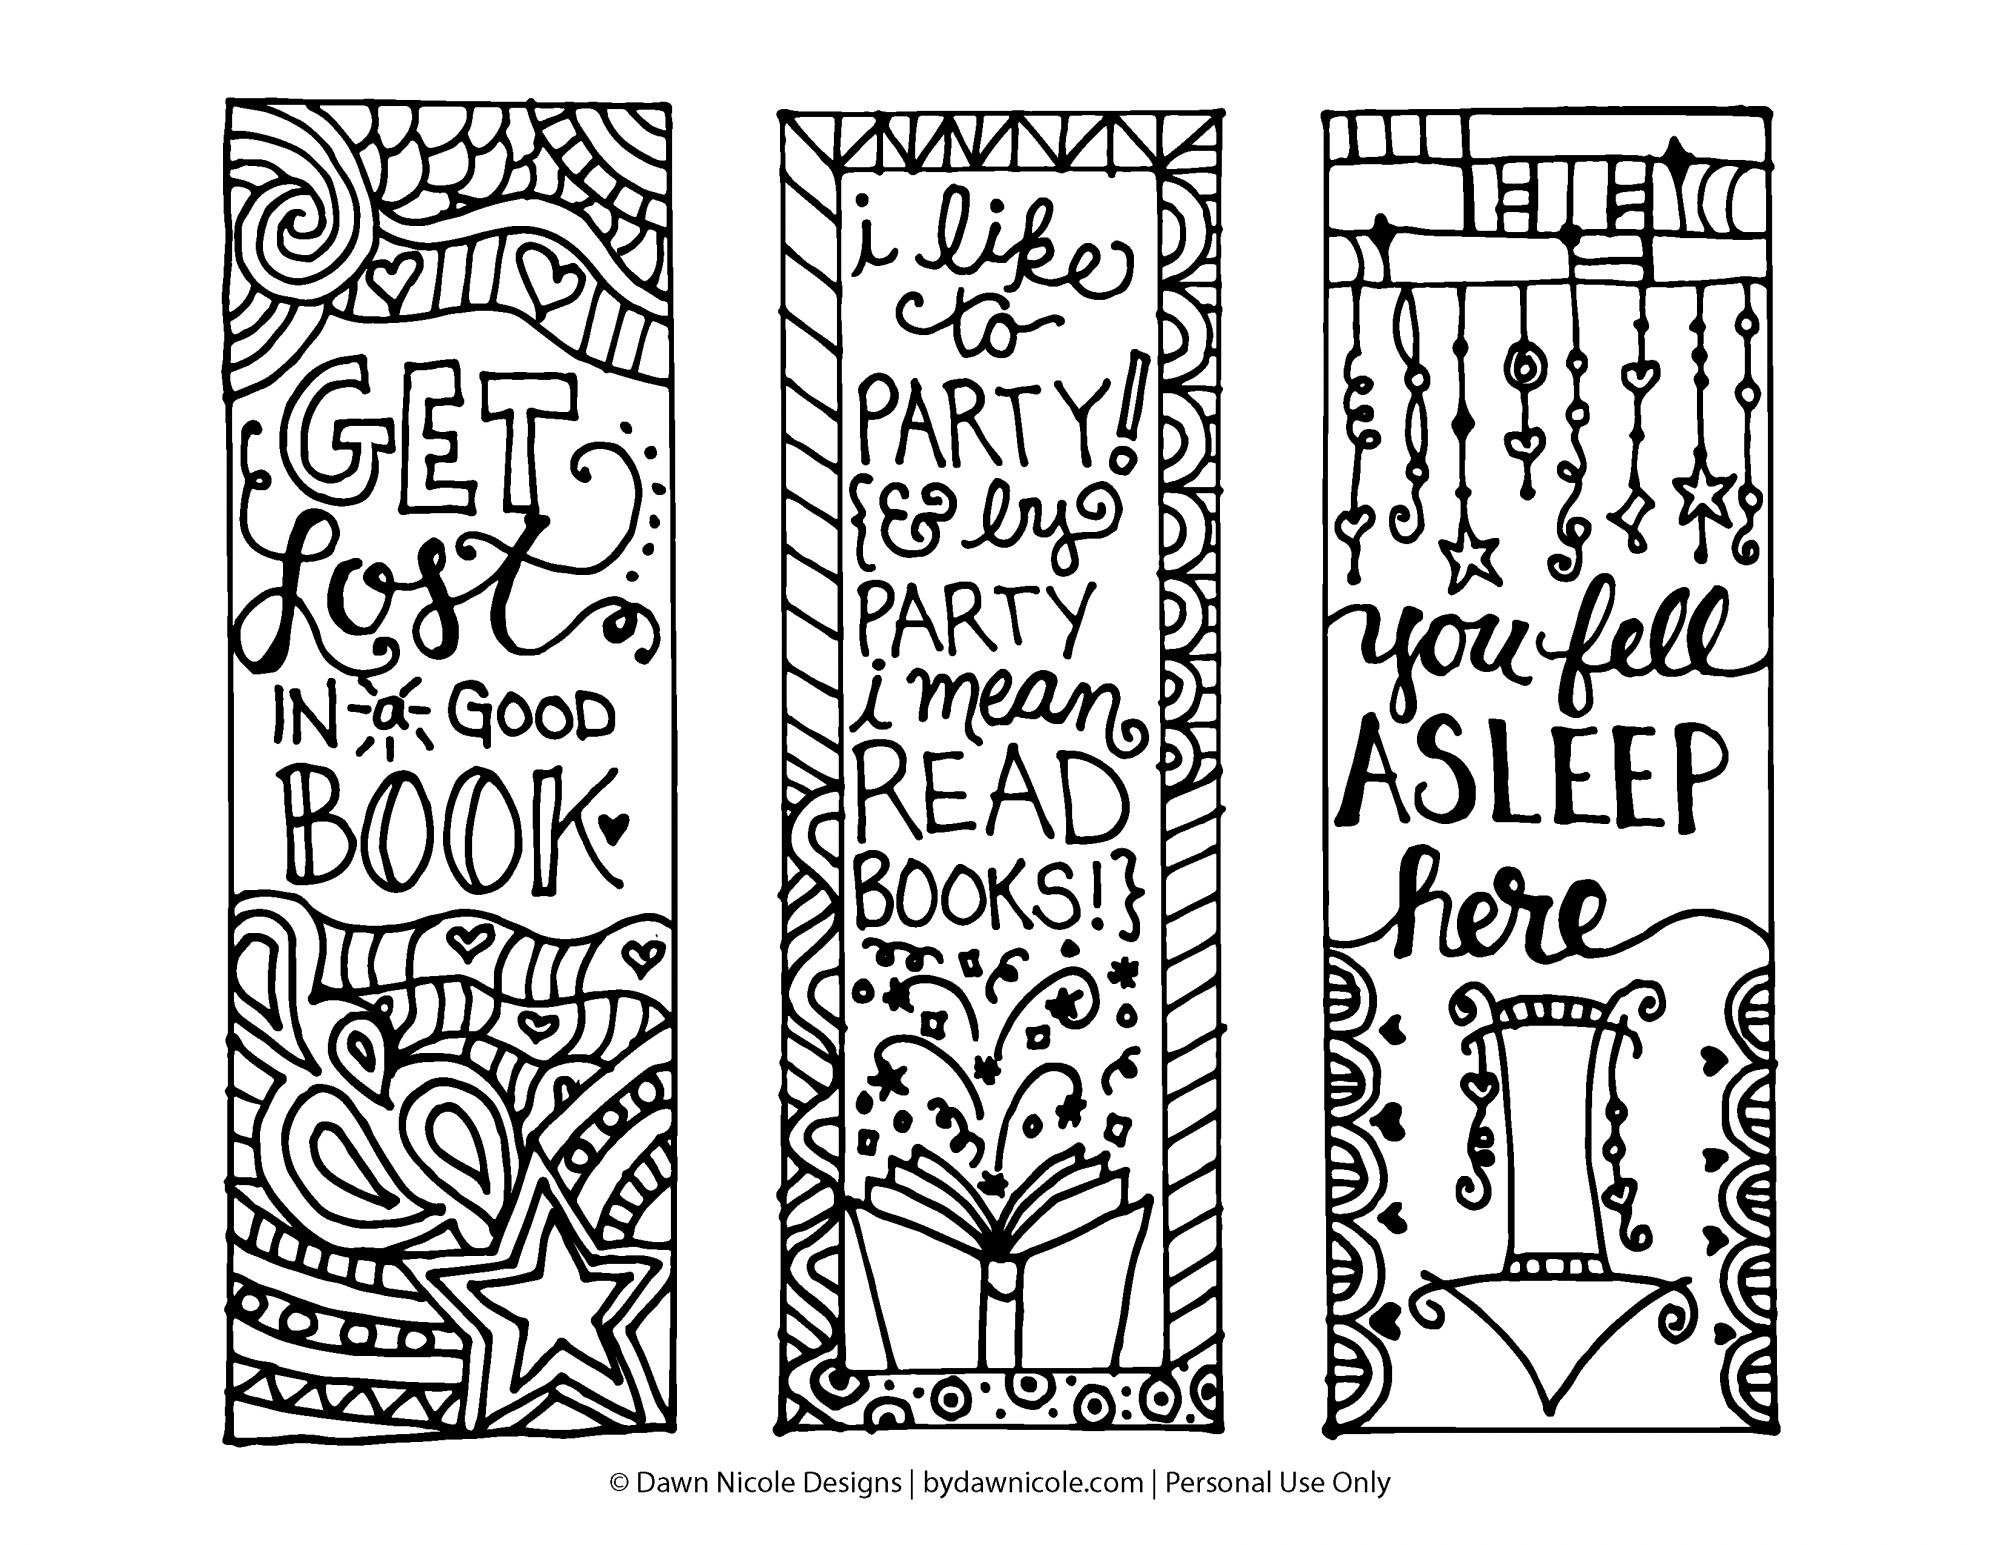 Free Printable Coloring Page Bookmarks | Dawn Nicole Designs® - Free Printable Bookmarks For Libraries